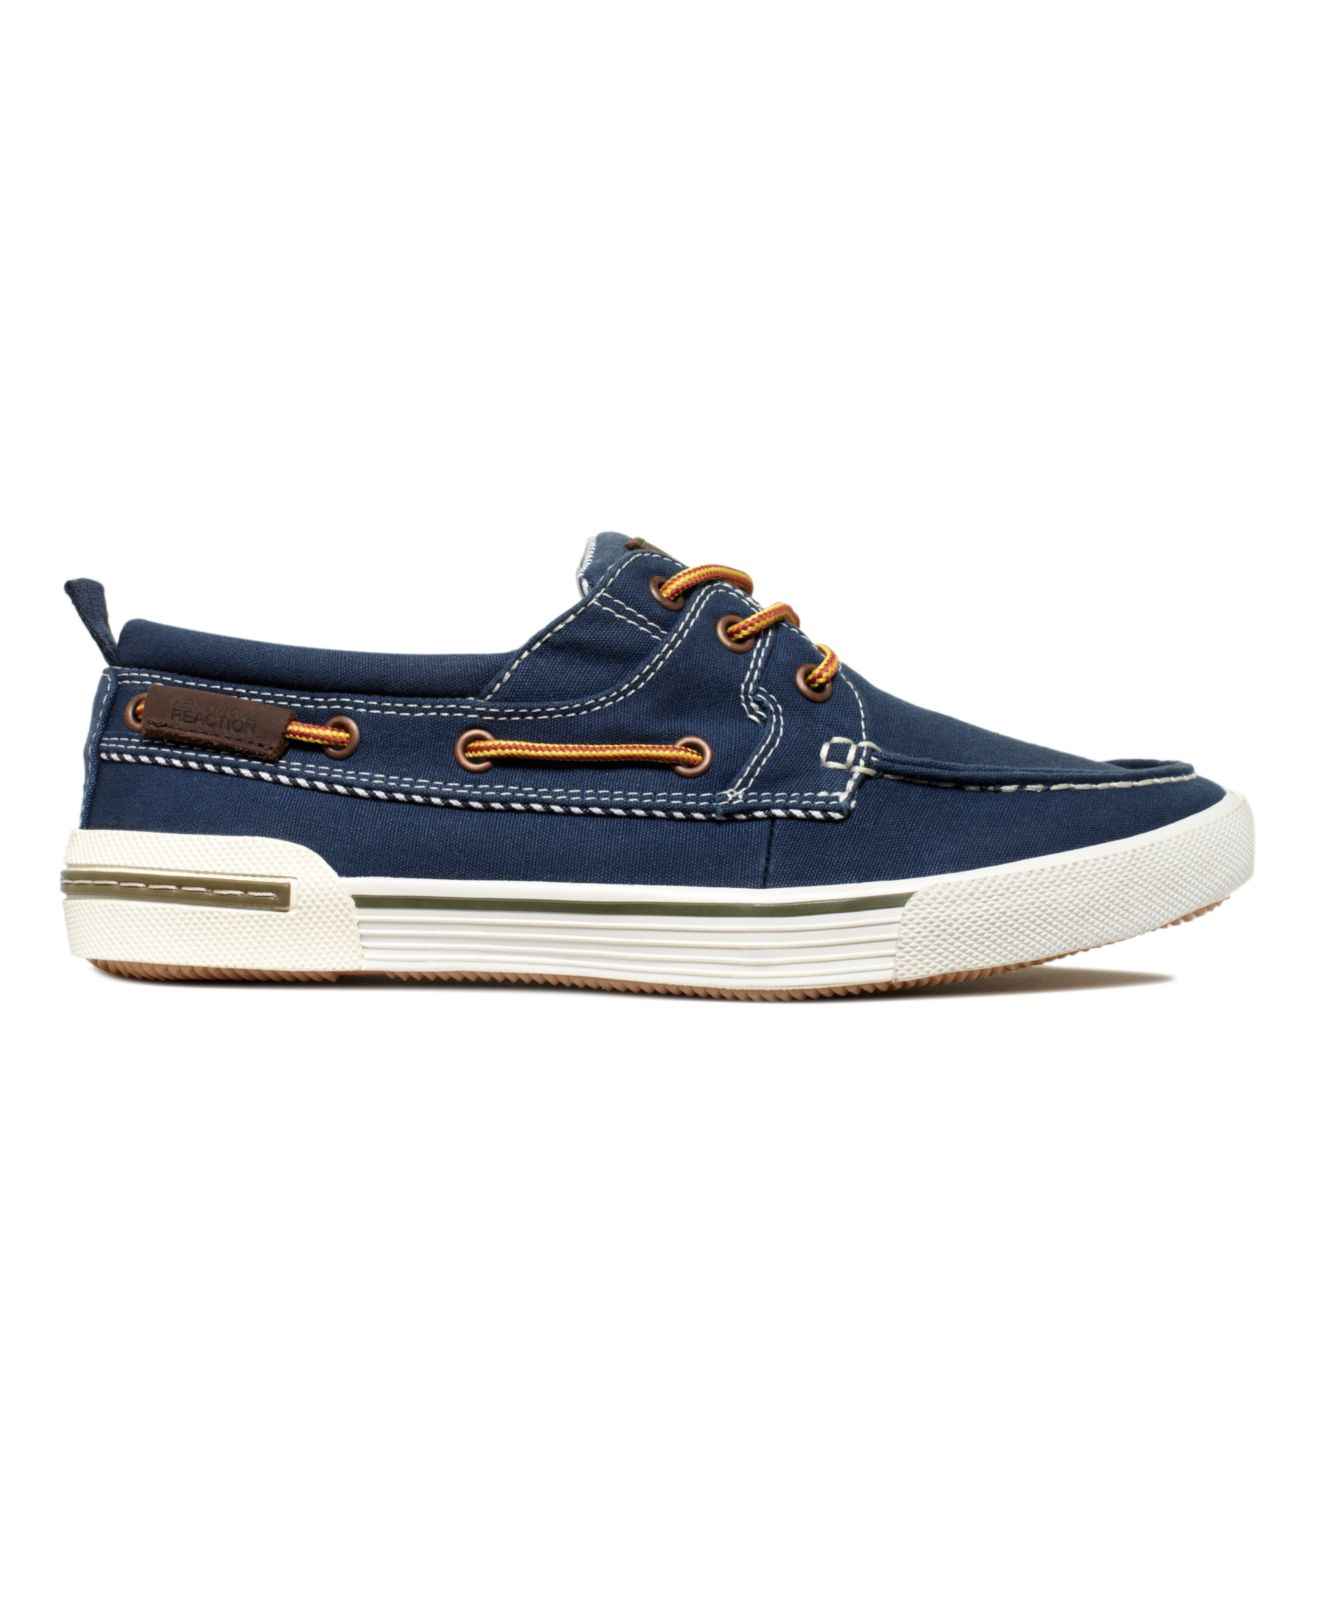 Anchor Canvas Boat Shoes in Navy 